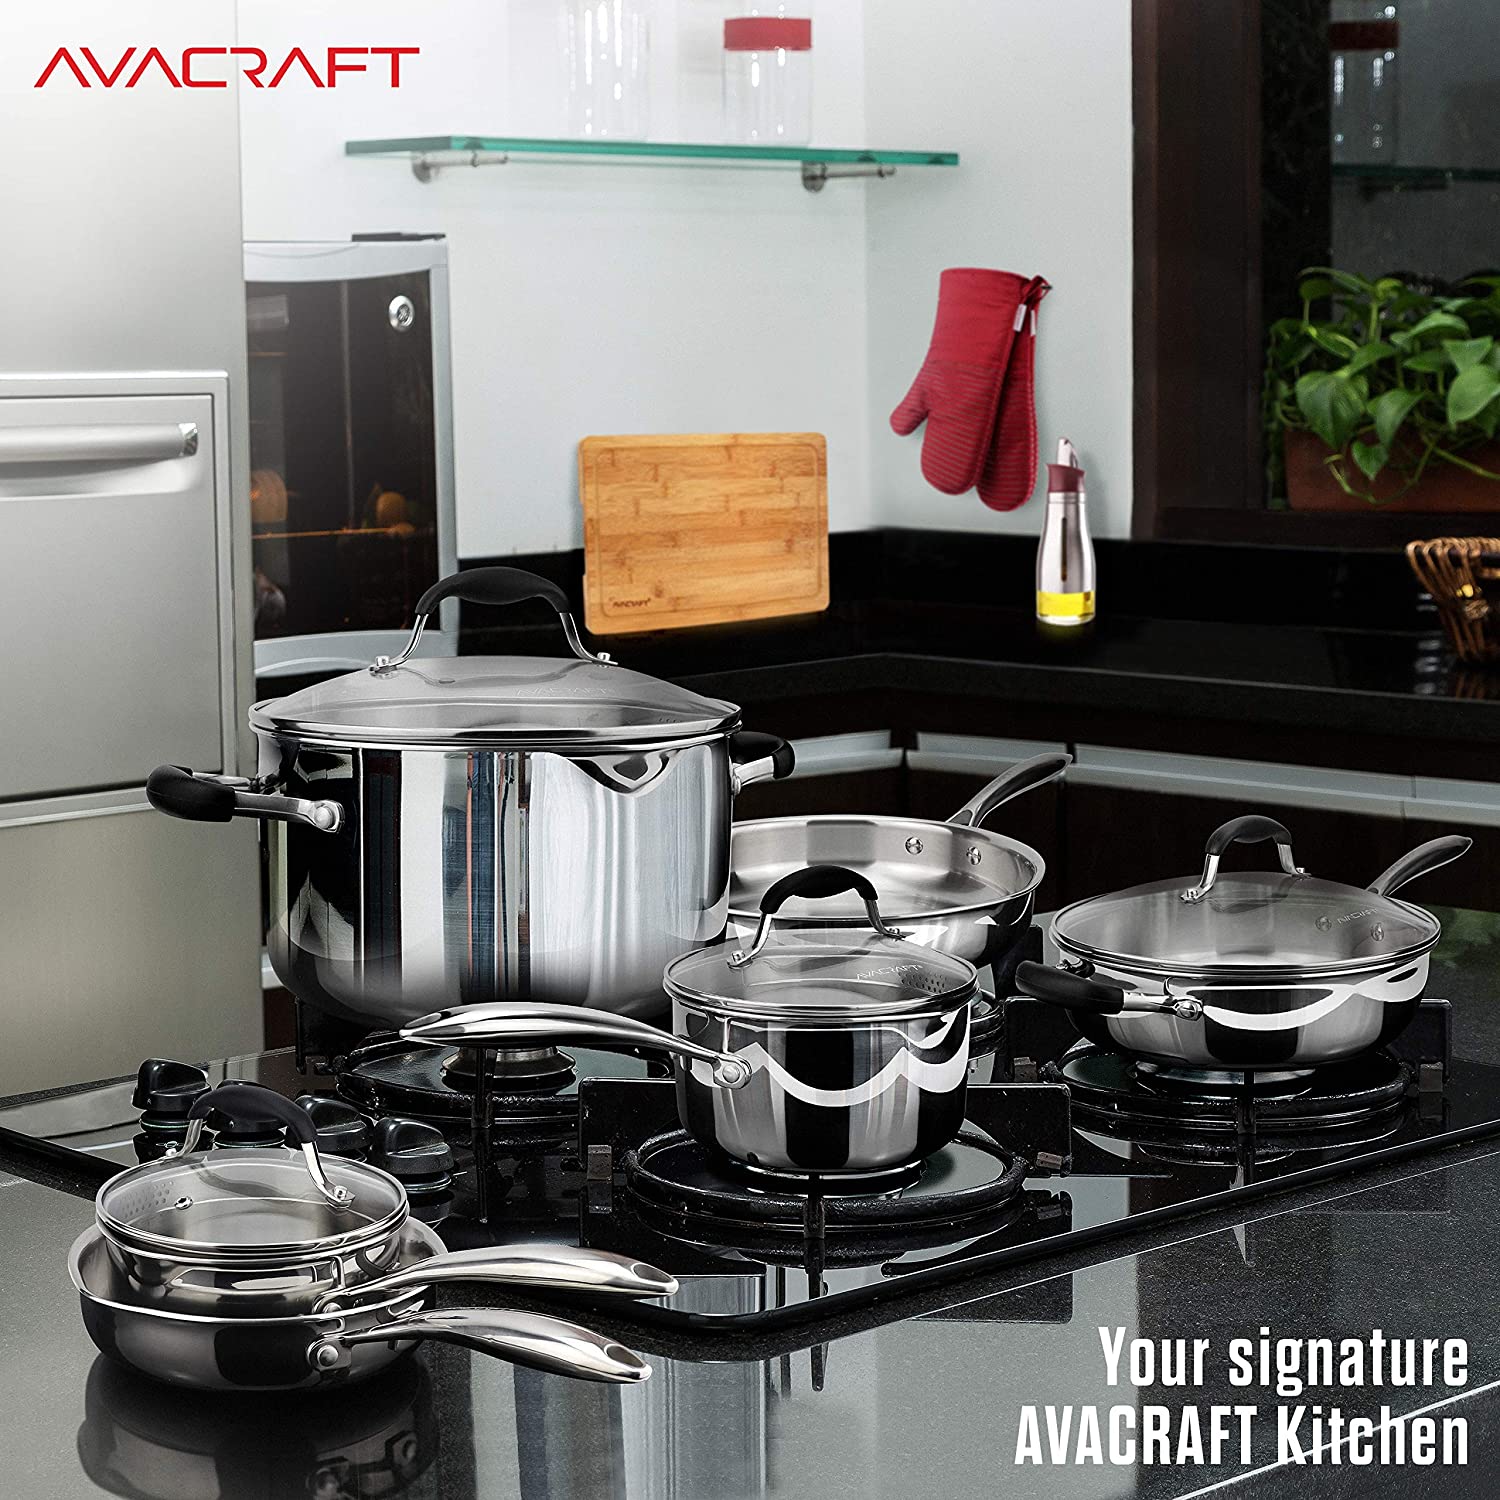 AVACRAFT 18/10 Stainless Steel Premium Multiclad Pots and Pans Set, 10